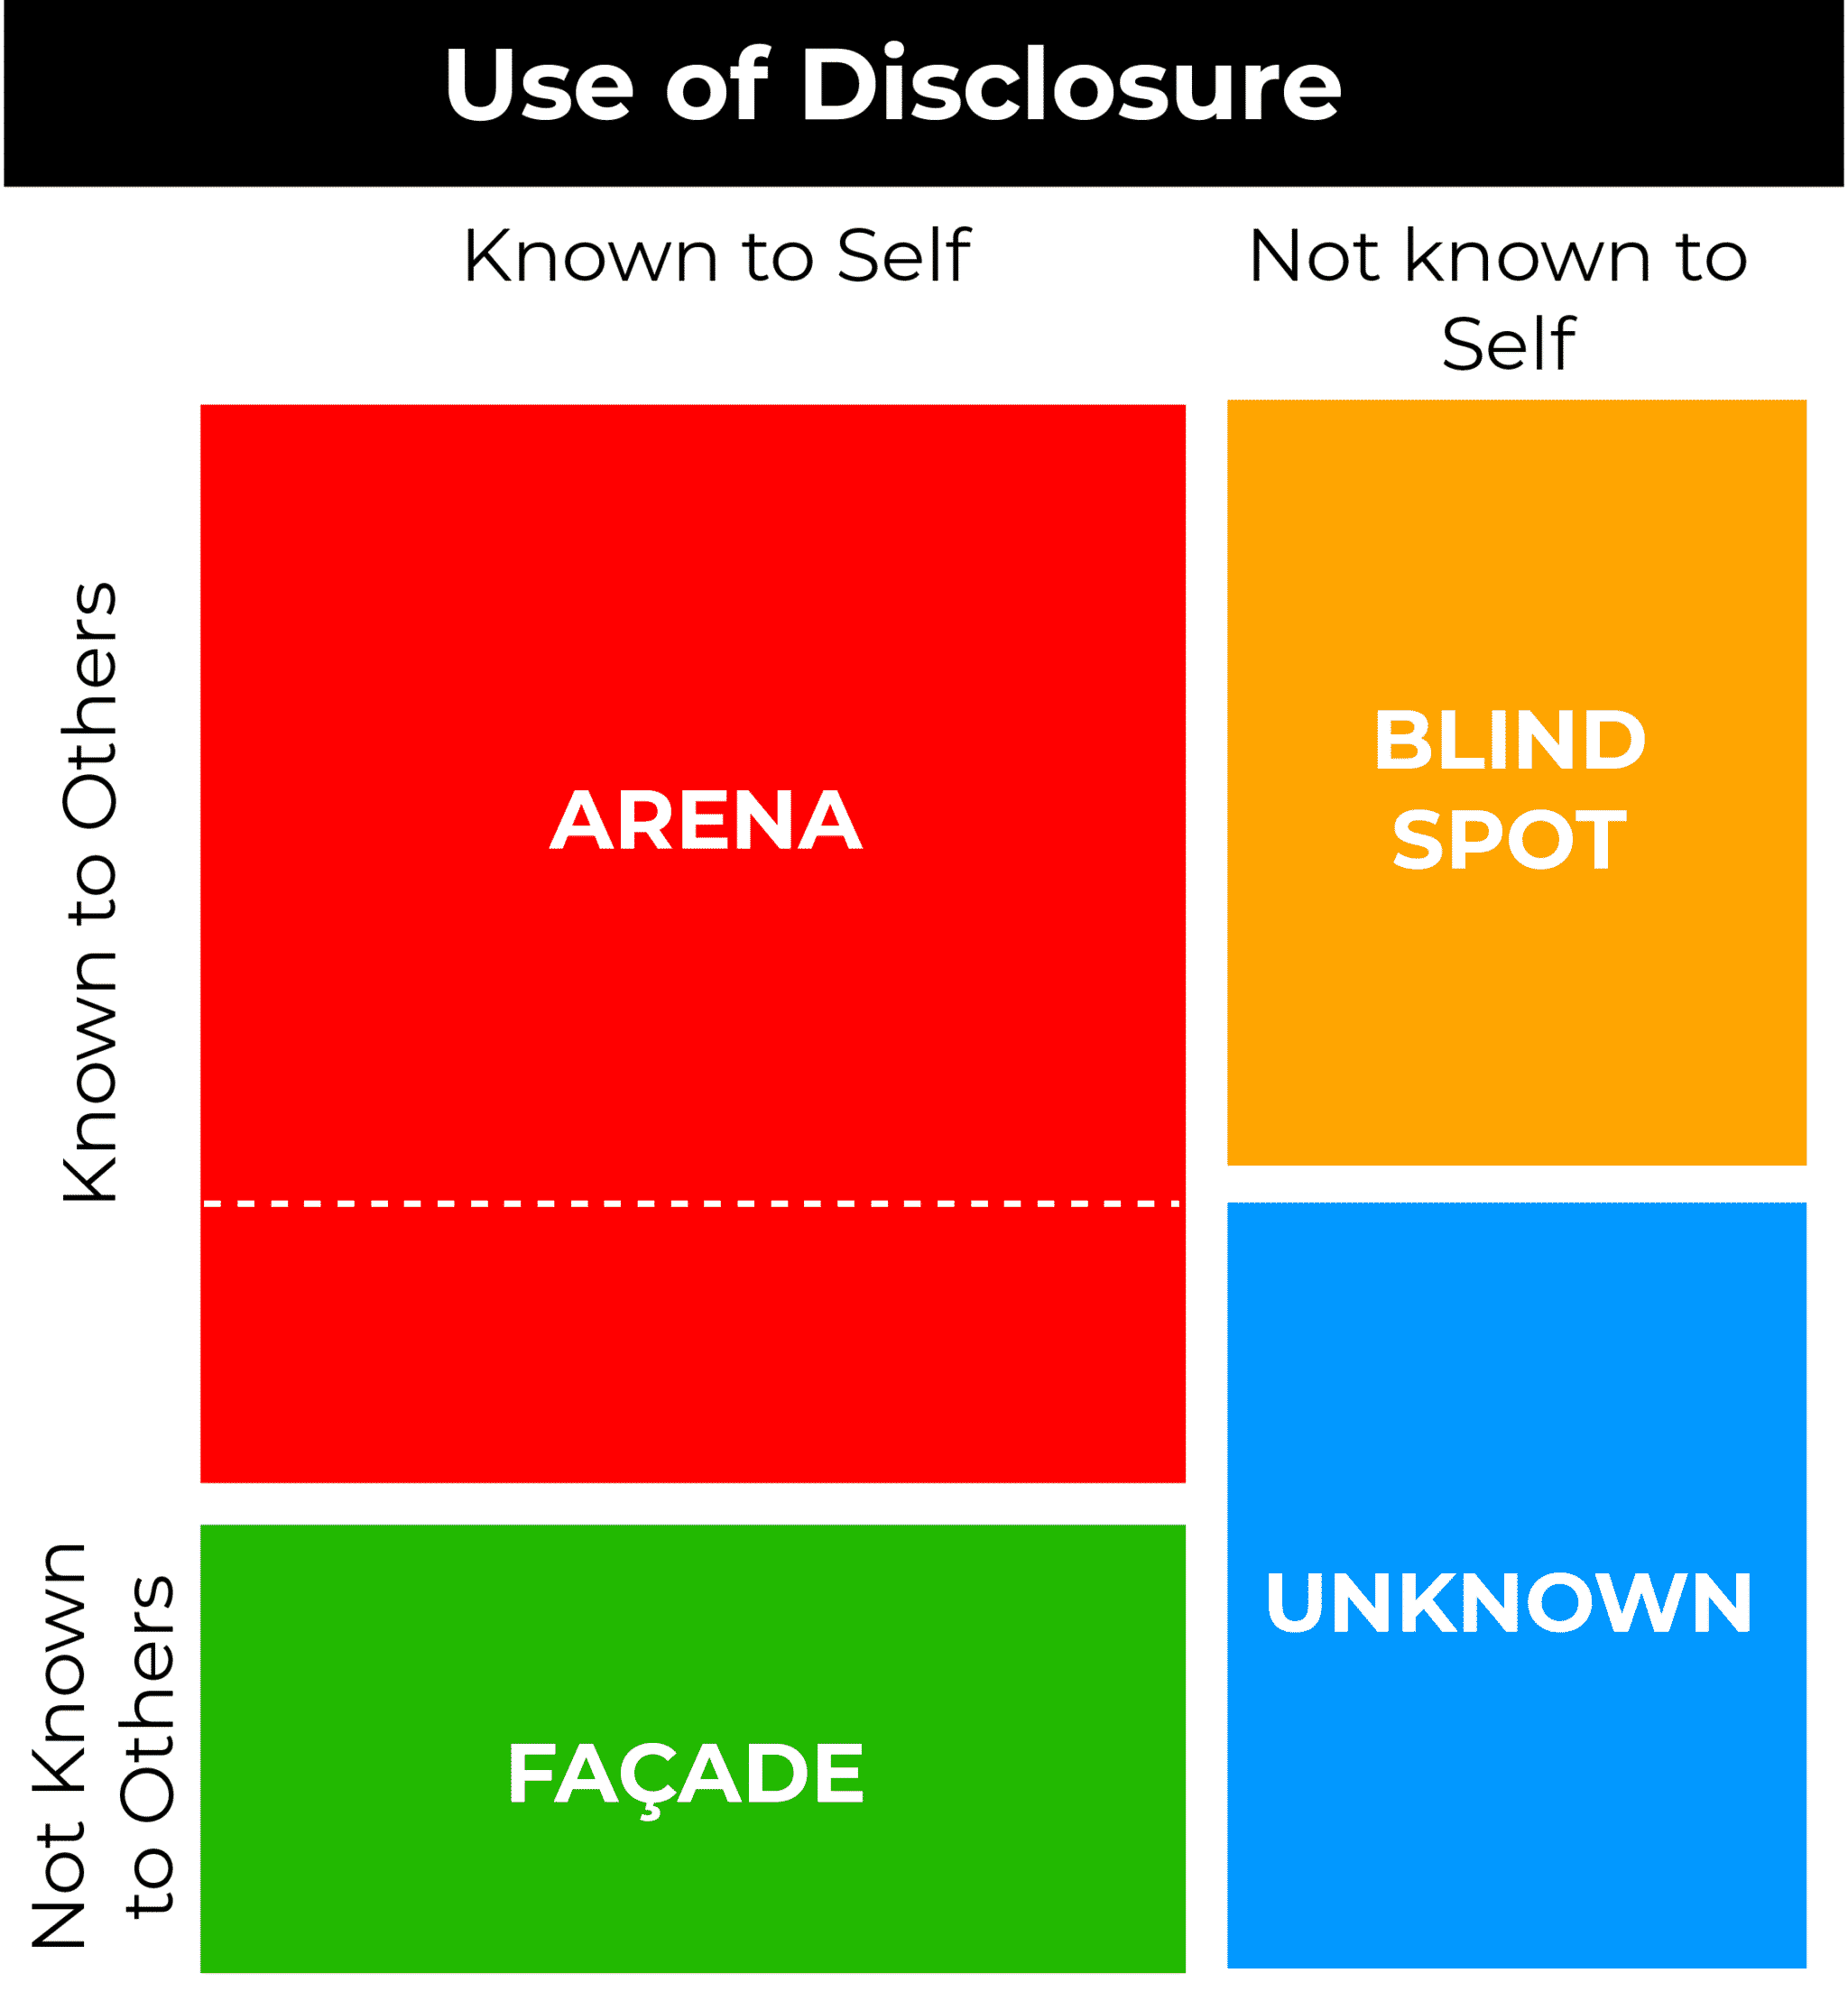 USE OF DISCLOSURE